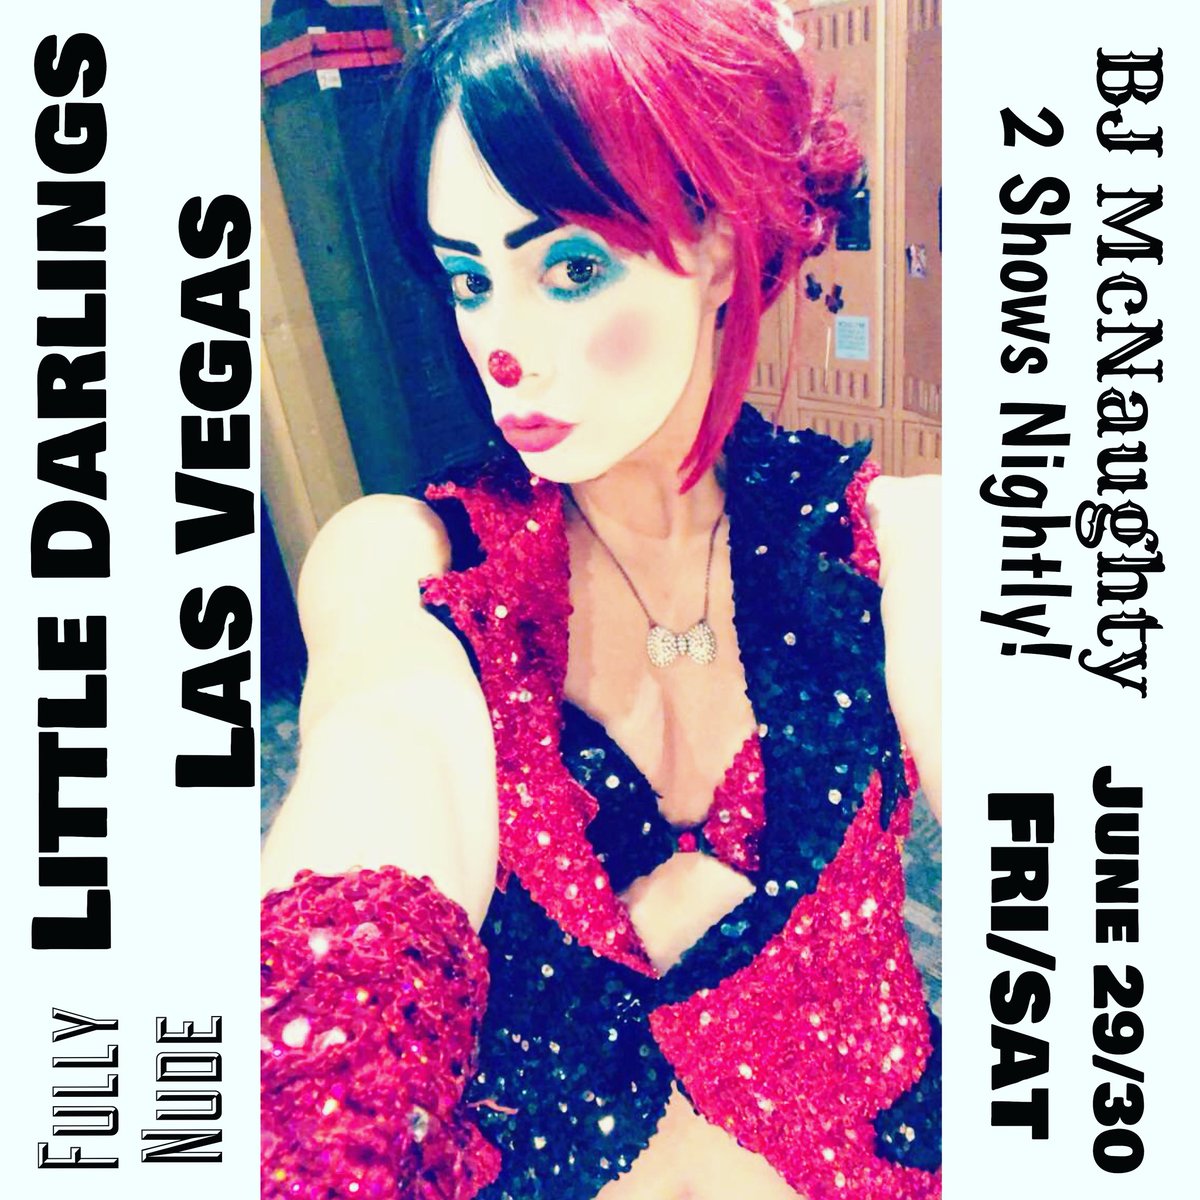 Starts tonight at 11pm! Come clown around with me in Las Vegas at @LittleDsLV 
#lasvegas #littledarlingslv #littledarlings #featureentertainer #feature #clownstripper #stripperclown #travelingshowgirl #travelingcircus #comiccon #lasvegascomiccon #letsgetnaughty #turnclownforwhat